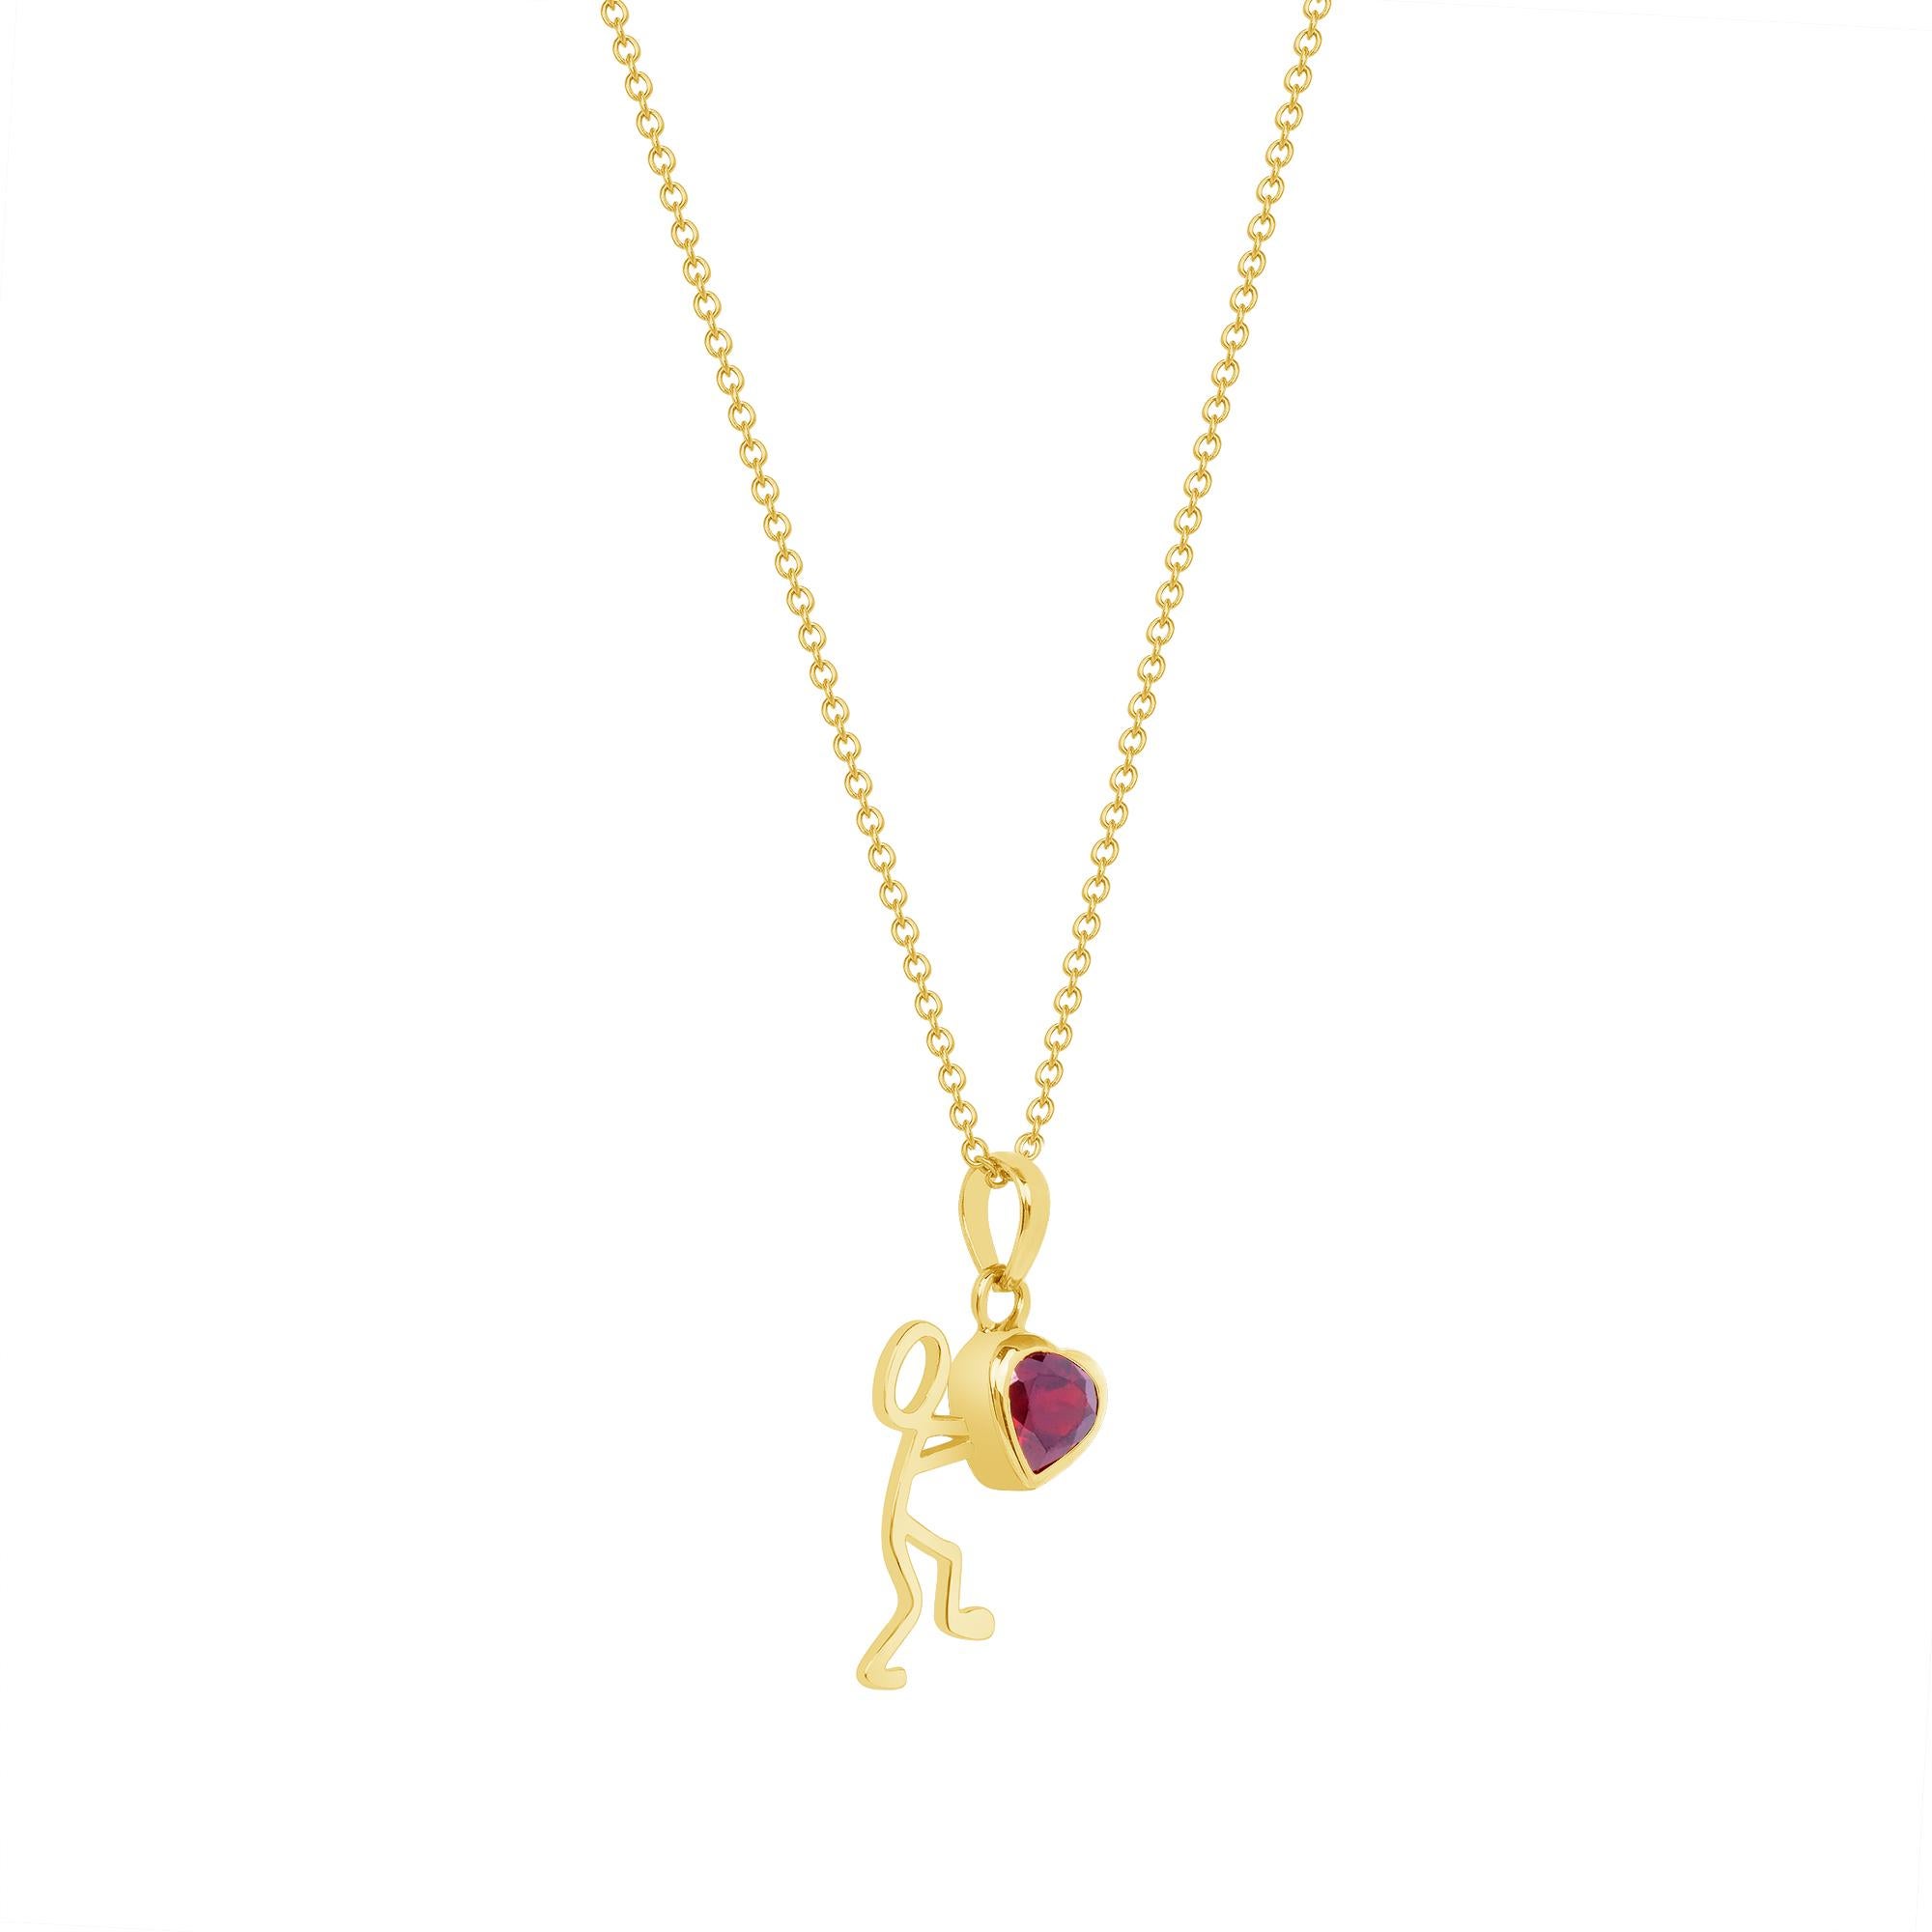 Contemporary 0.55 Carat Garnet Yellow Gold Stick Figure with Heart Pendant Necklace For Sale